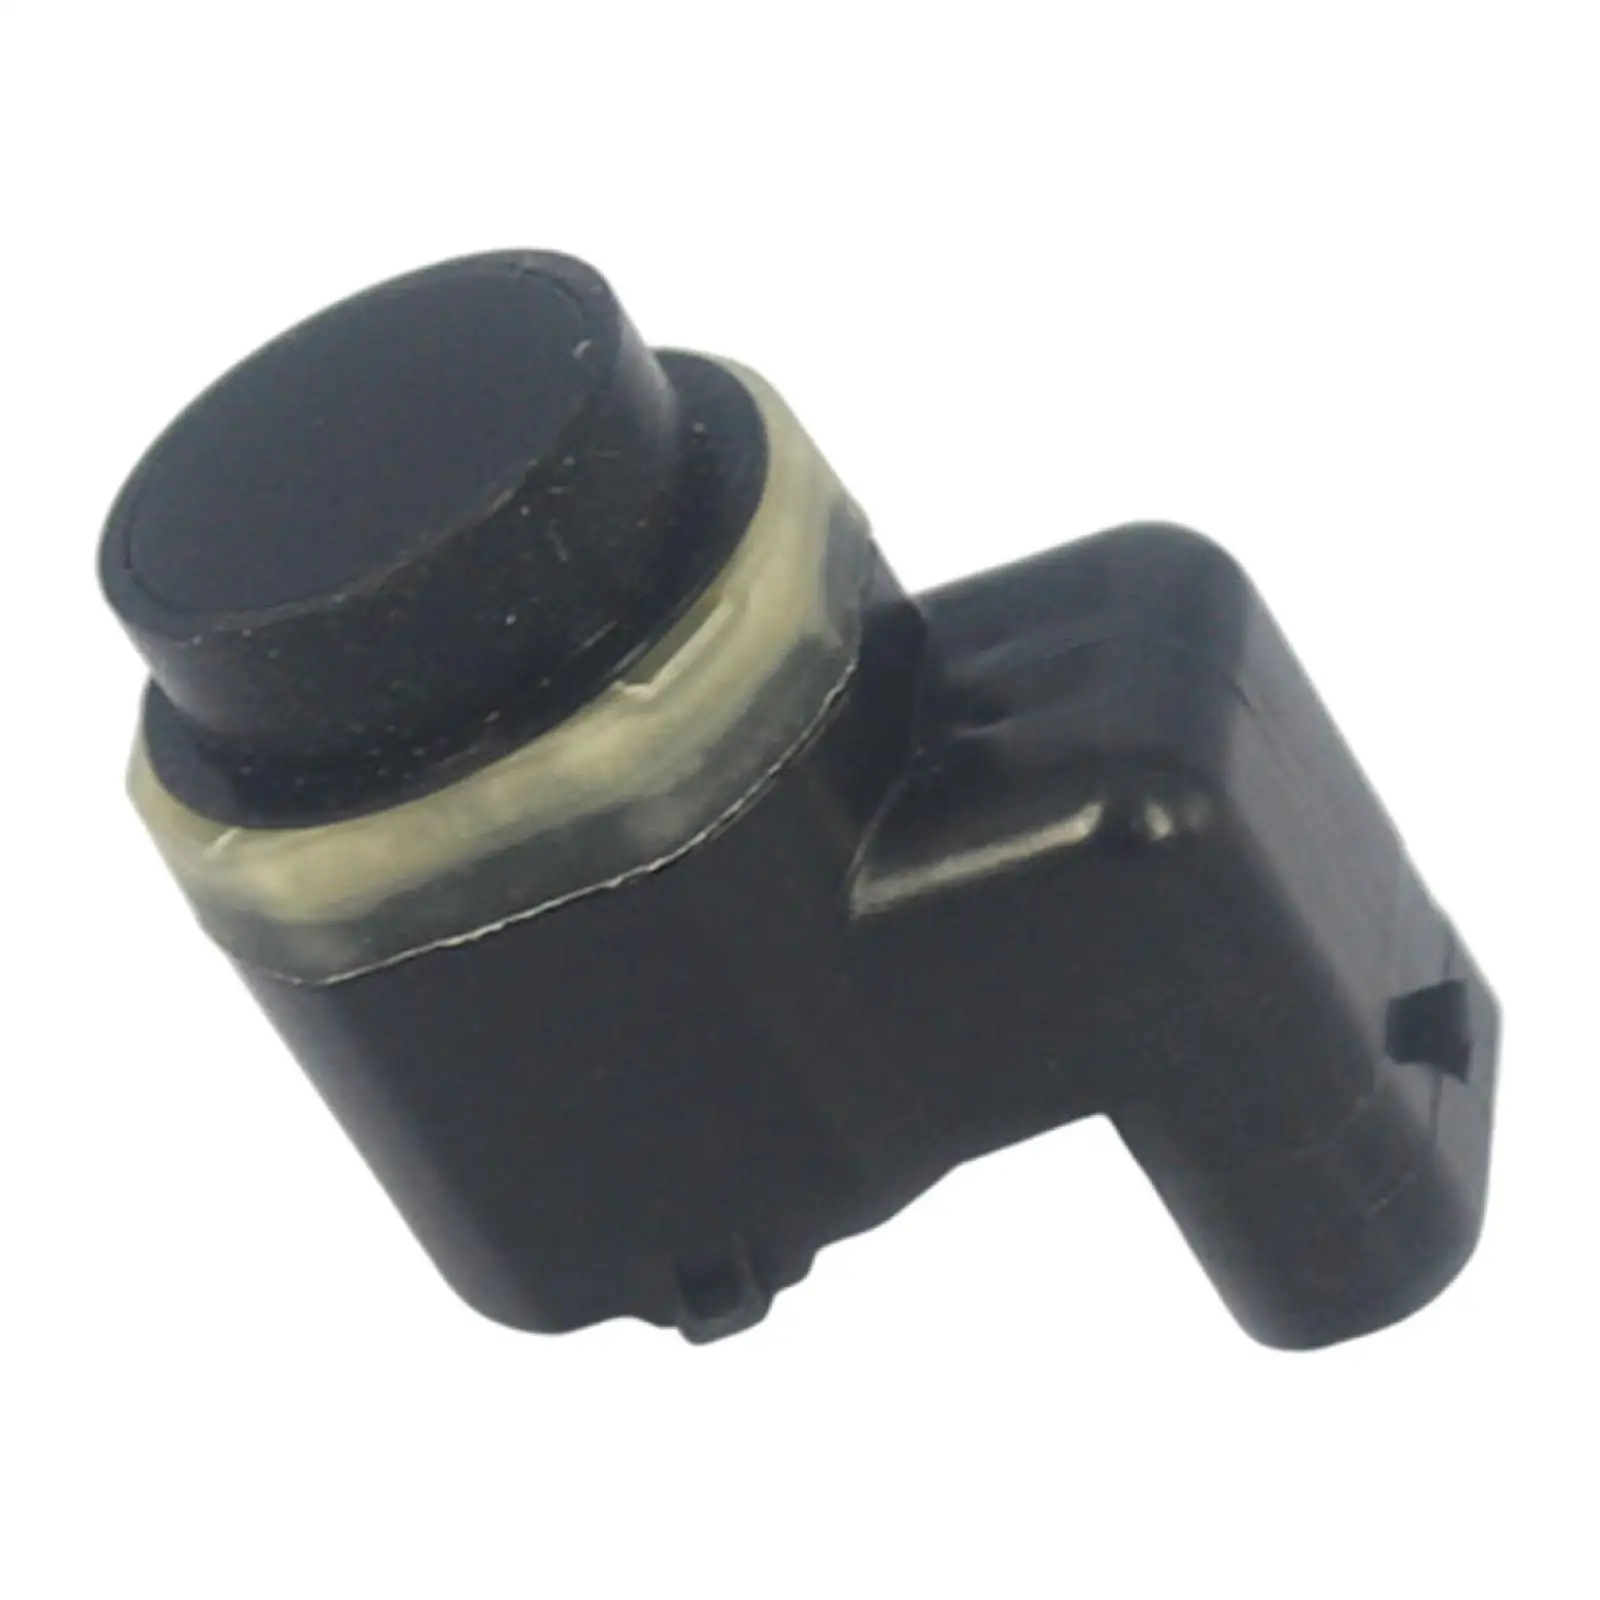 Parking Sensor for All New XF (x260) - Front Sensor Only